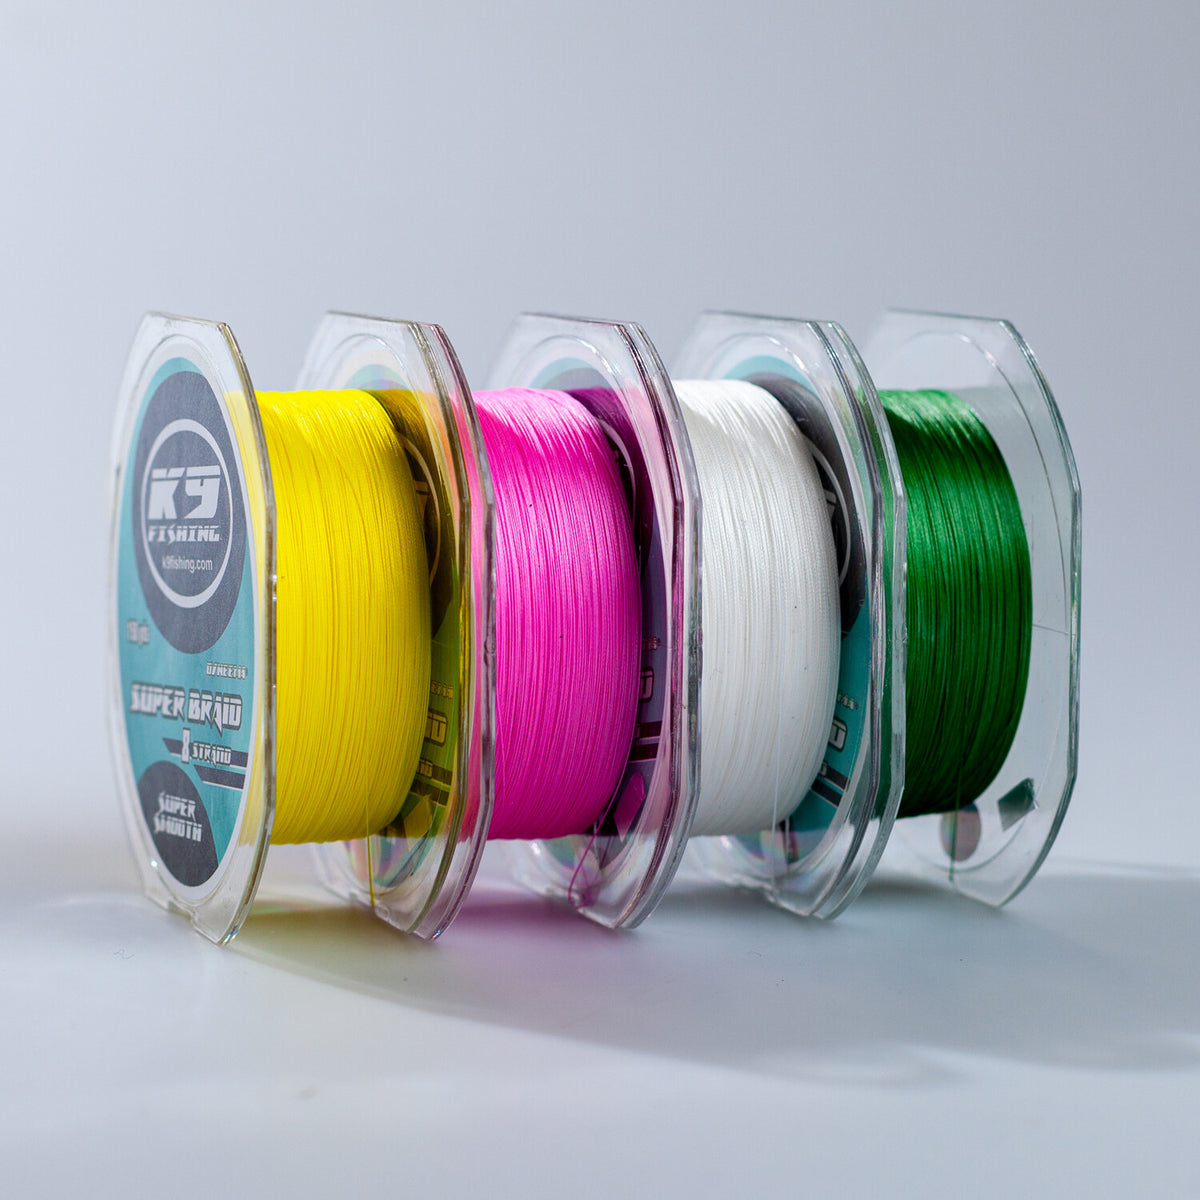 K9 Fluorocarbon Fishing Line - Choice of Sizes and Colors Available